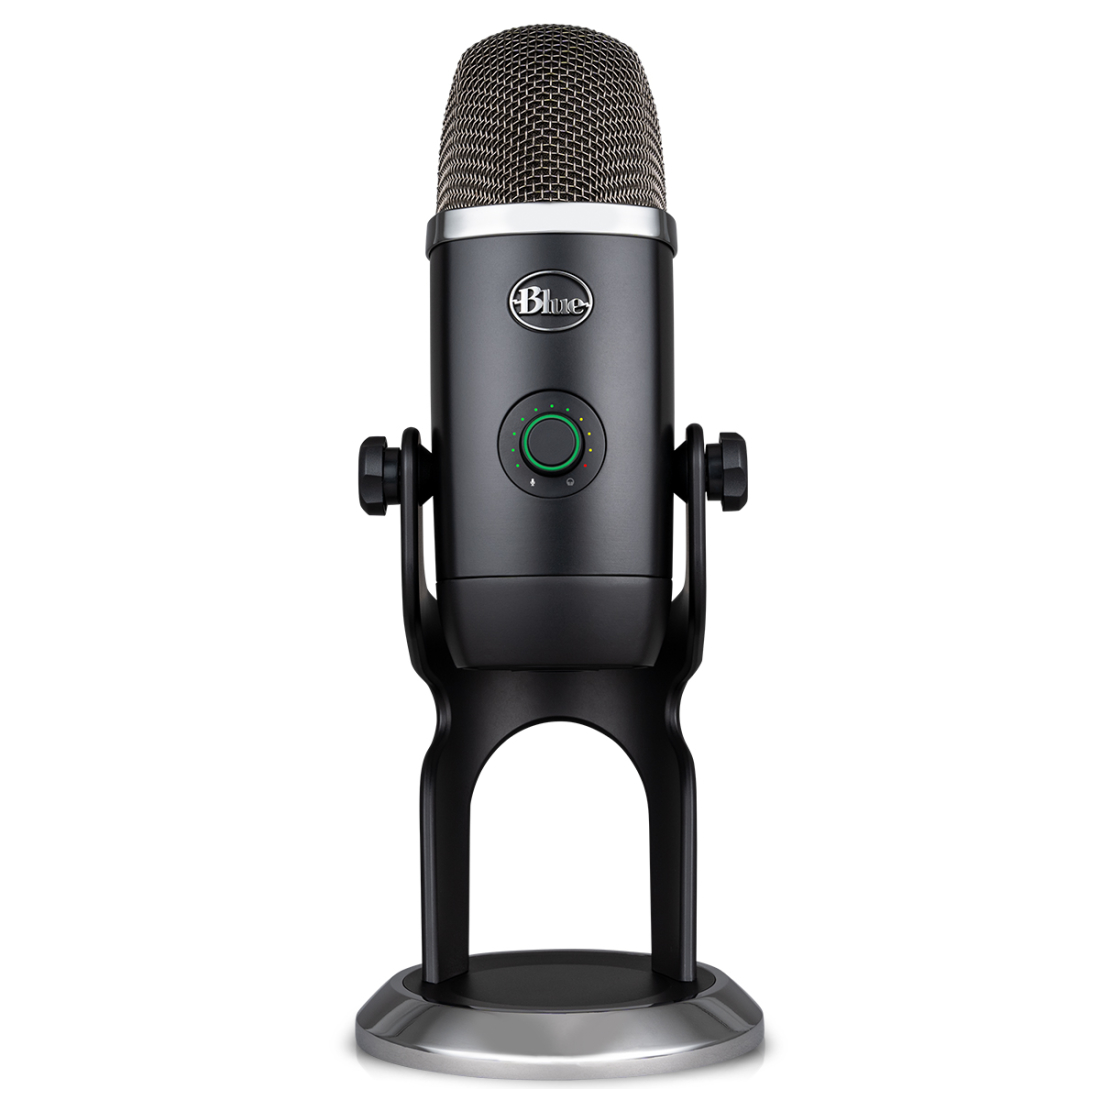 Yeti X Multi-Pattern USB Microphone for Gaming, Streaming and Podcasting